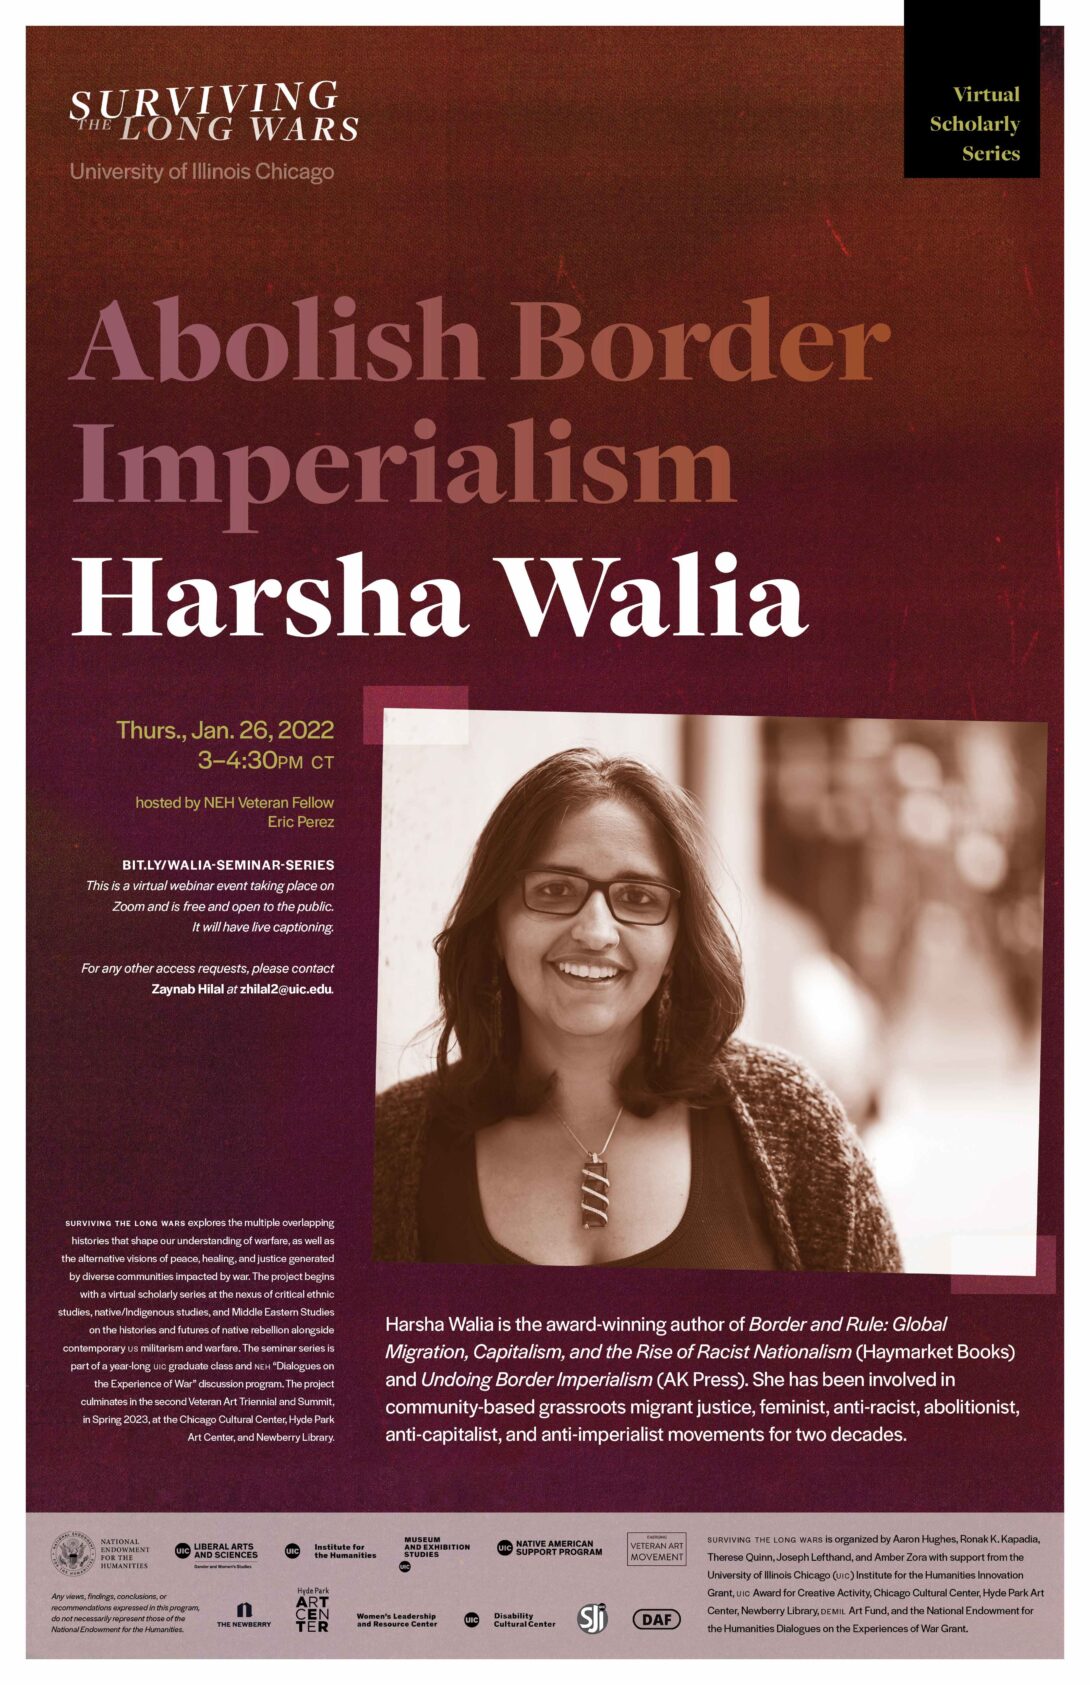 A purple poster with text announcing a virtual lecture by Harsha Walia on Thursday, January 26th. The project’s title 'Surviving the Long Wars' is written in large text at the top of the flyer along with the Scholar Series’s title “Abolish Border Imperialism”. The poster has a headshot of Walia, her bio, and details about the series.